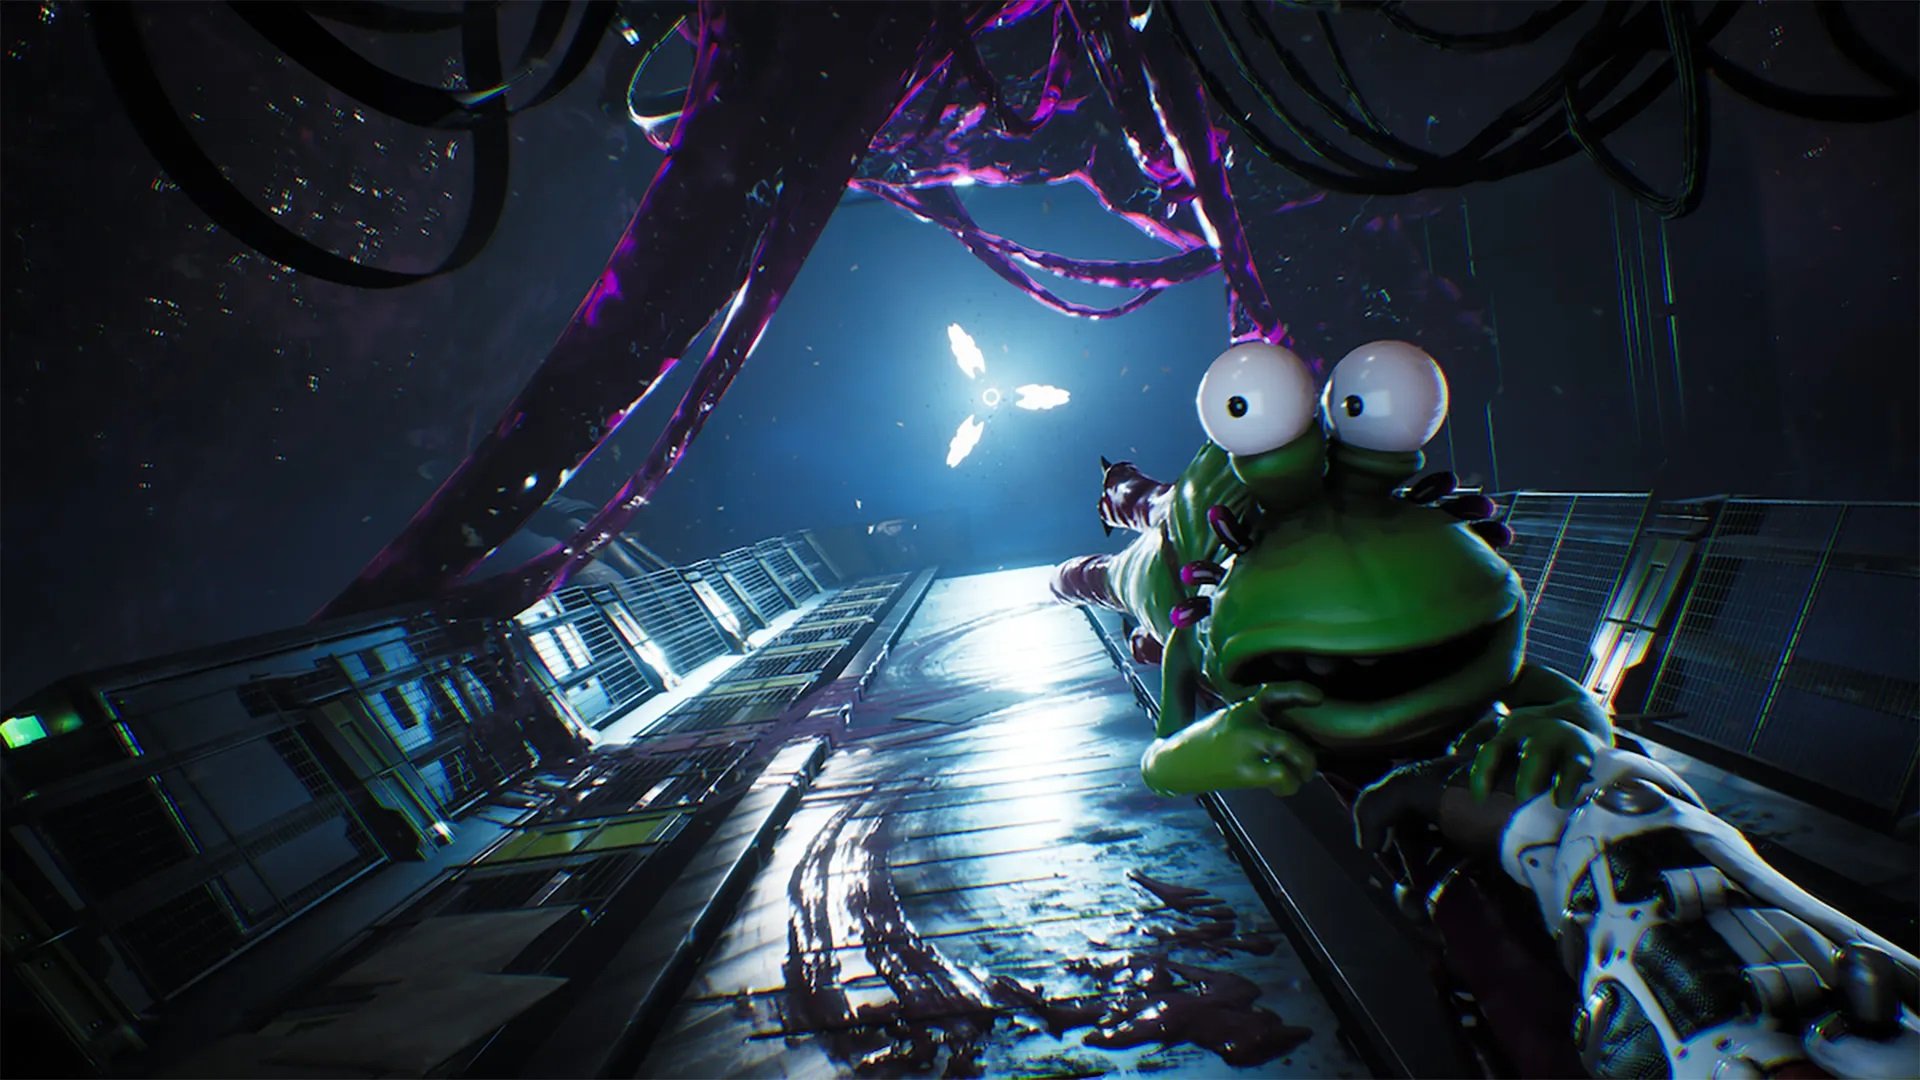 High on Life comes to PS5 with performance and animation issues